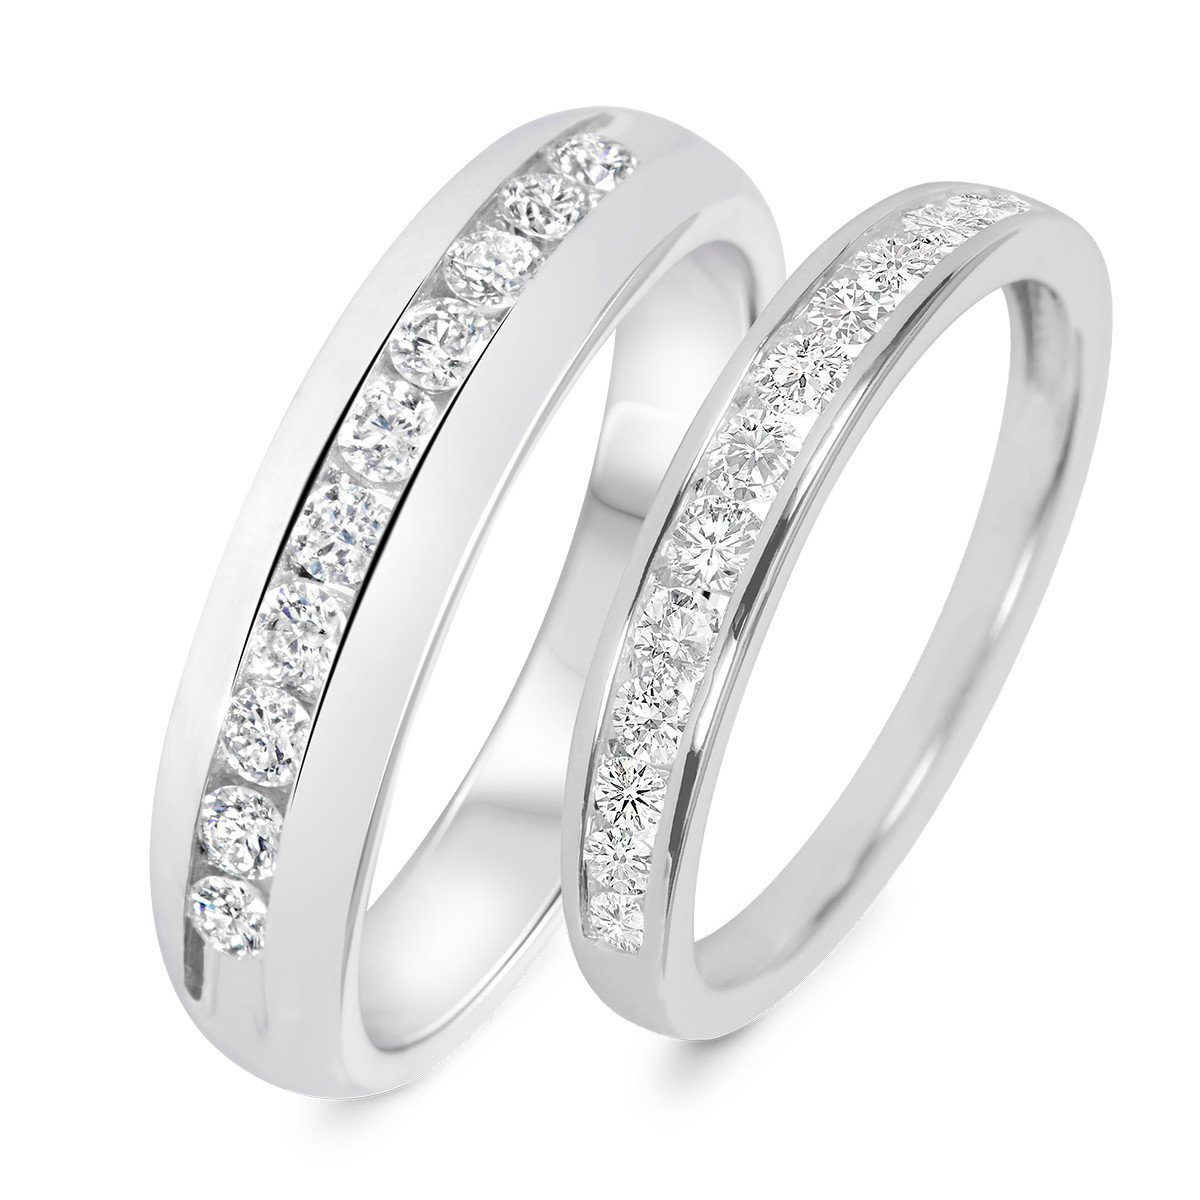 His And Hers Wedding Rings White Gold
 7 8 Carat T W Diamond His And Hers Wedding Band Set 14K